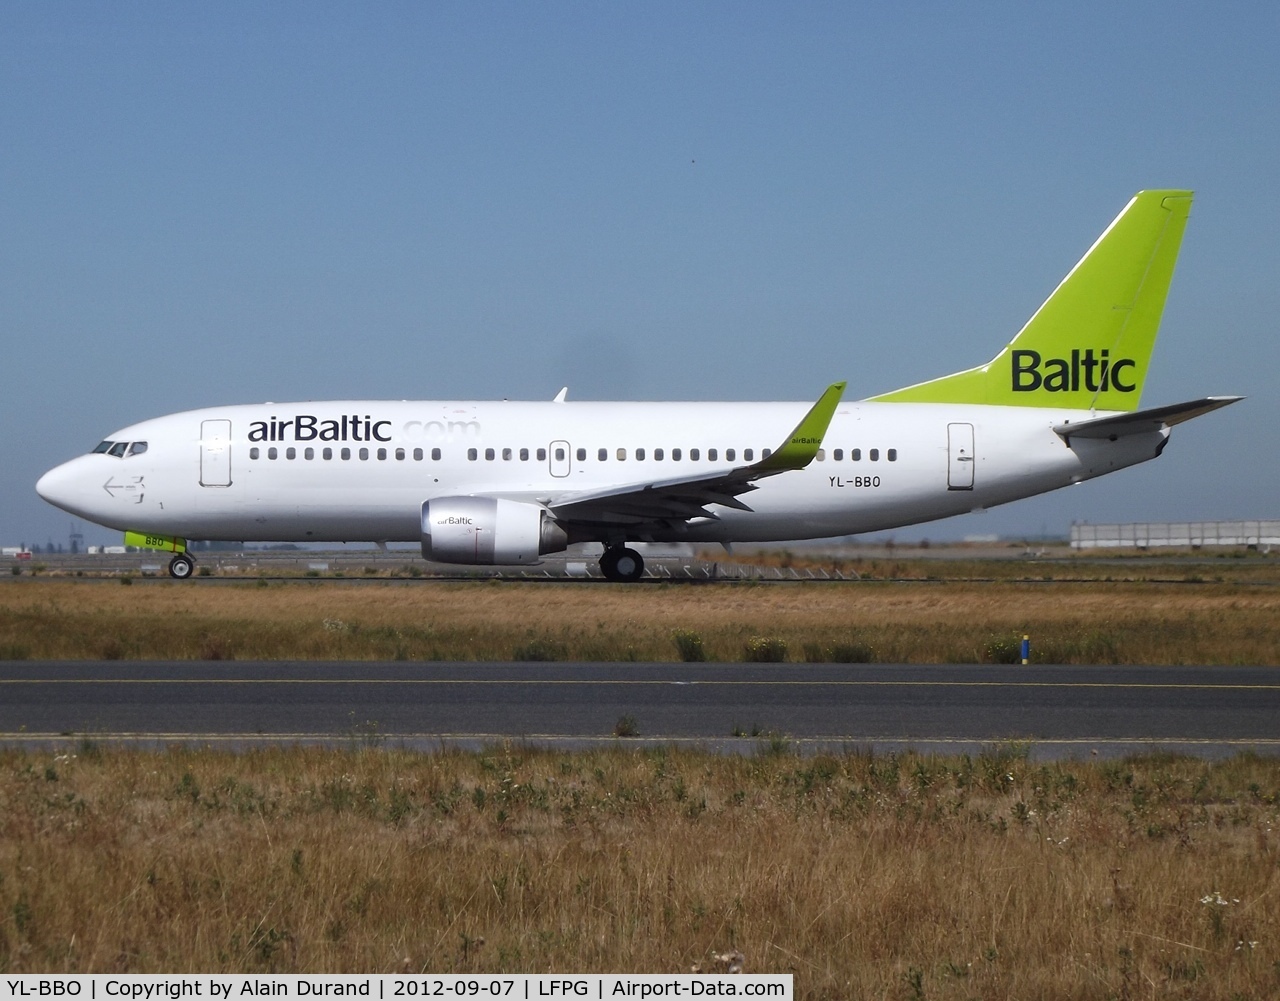 YL-BBO, 1998 Boeing 737-33V C/N 29335, Air Baltic's latest fleet entry started her useful life with easyJet as G-EZYK. Sky Europe as HA-LKT from 2005 until 2007 and Thomson Fly as G-THOO from 2007 until early 2012 were her next airlines.